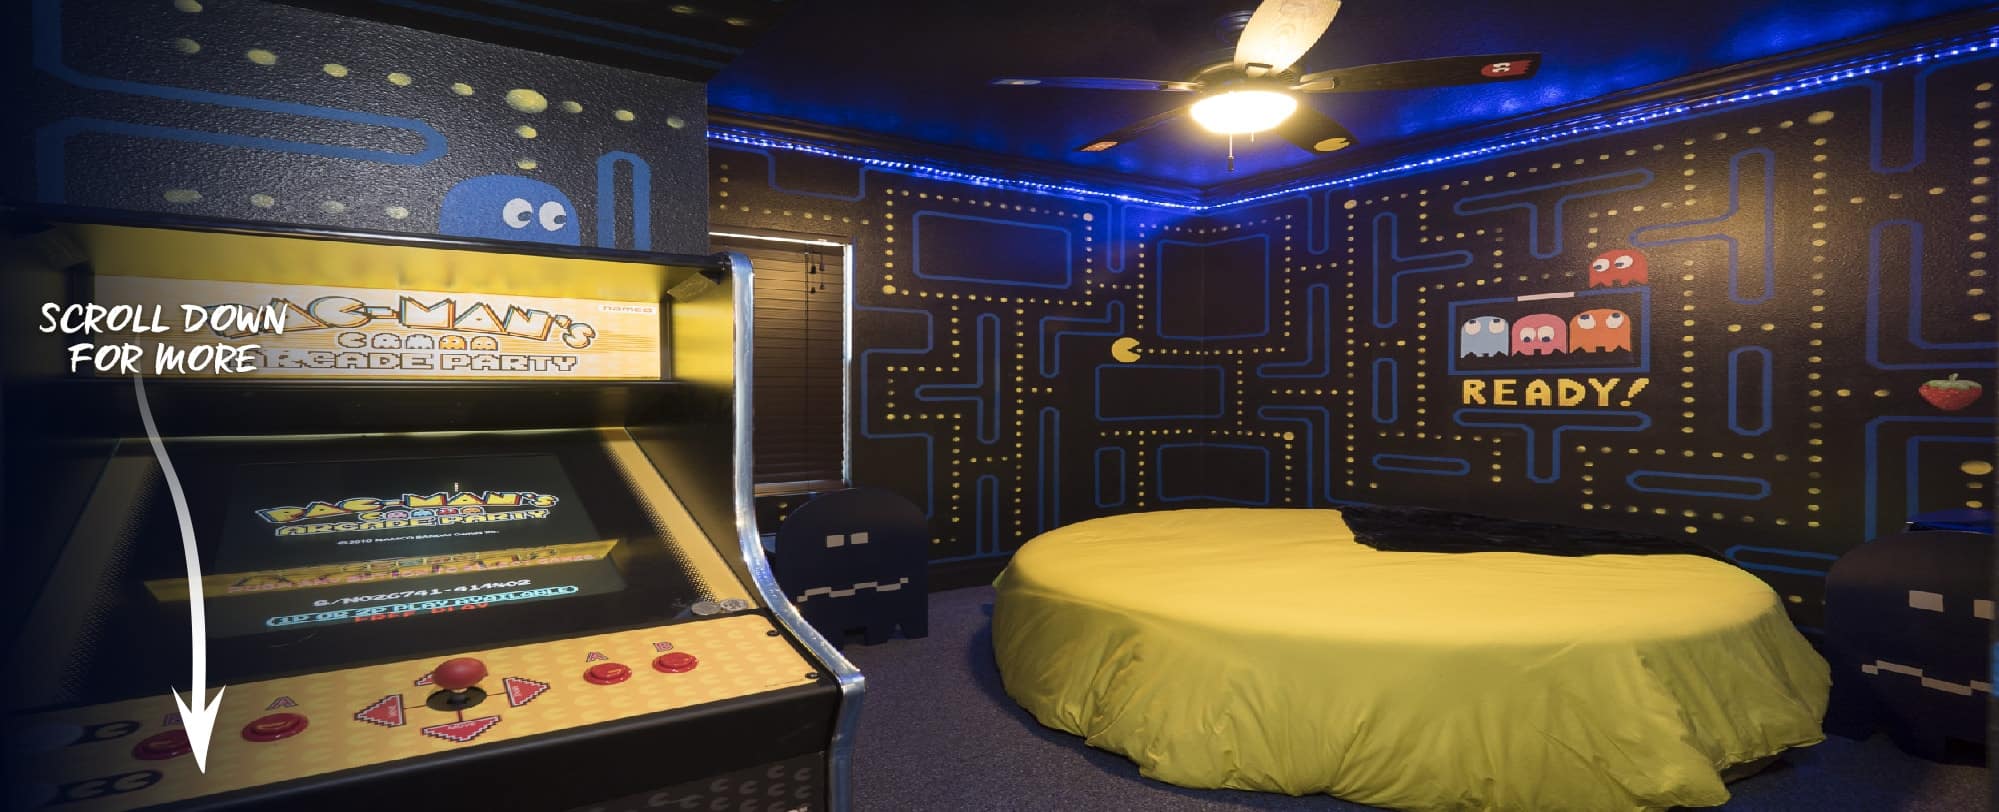 The 1980s Video Game Bedroom - Sleep in a Pac-Man maze at The Great Escape Lakeside - Managed by Orlando Area Luxury Rentals